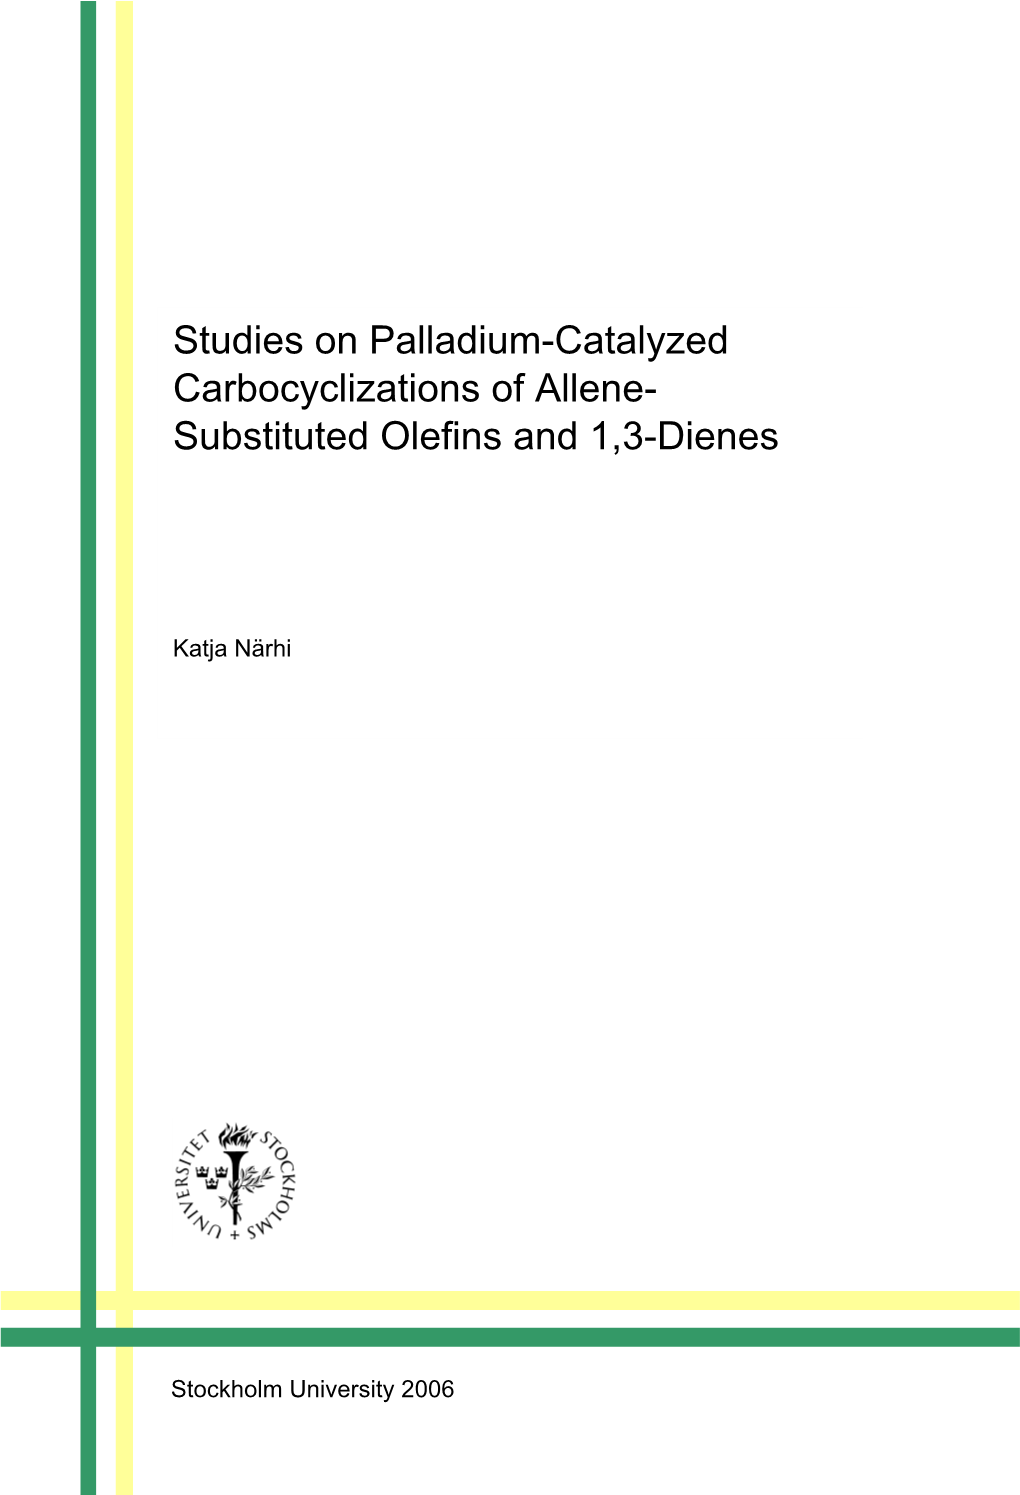 Studies on Palladium-Catalyzed Carbocyclizations of Allene- Substituted Olefins and 1,3-Dienes